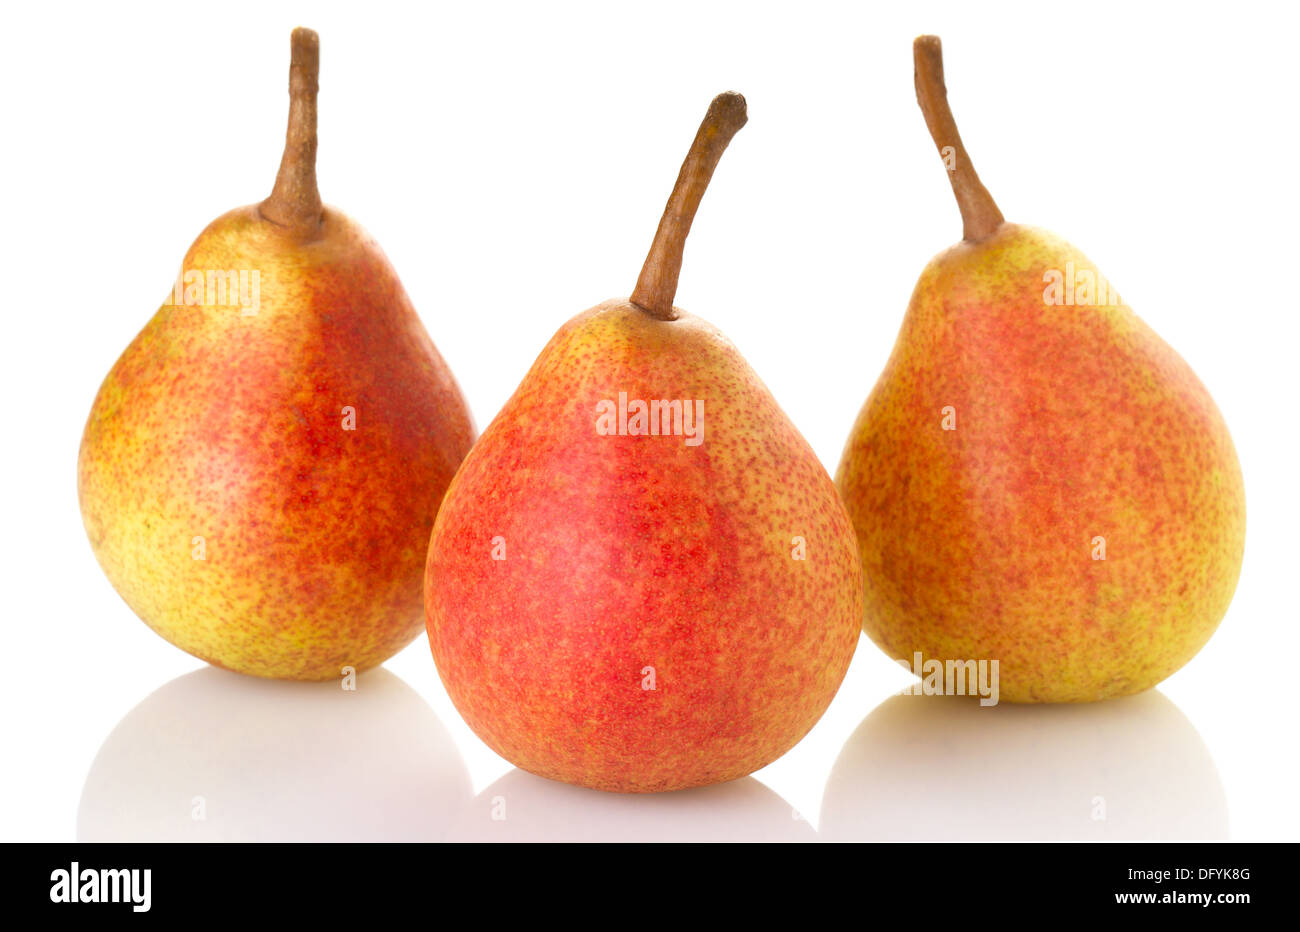 Three ripe pears isolated on white background Stock Photo